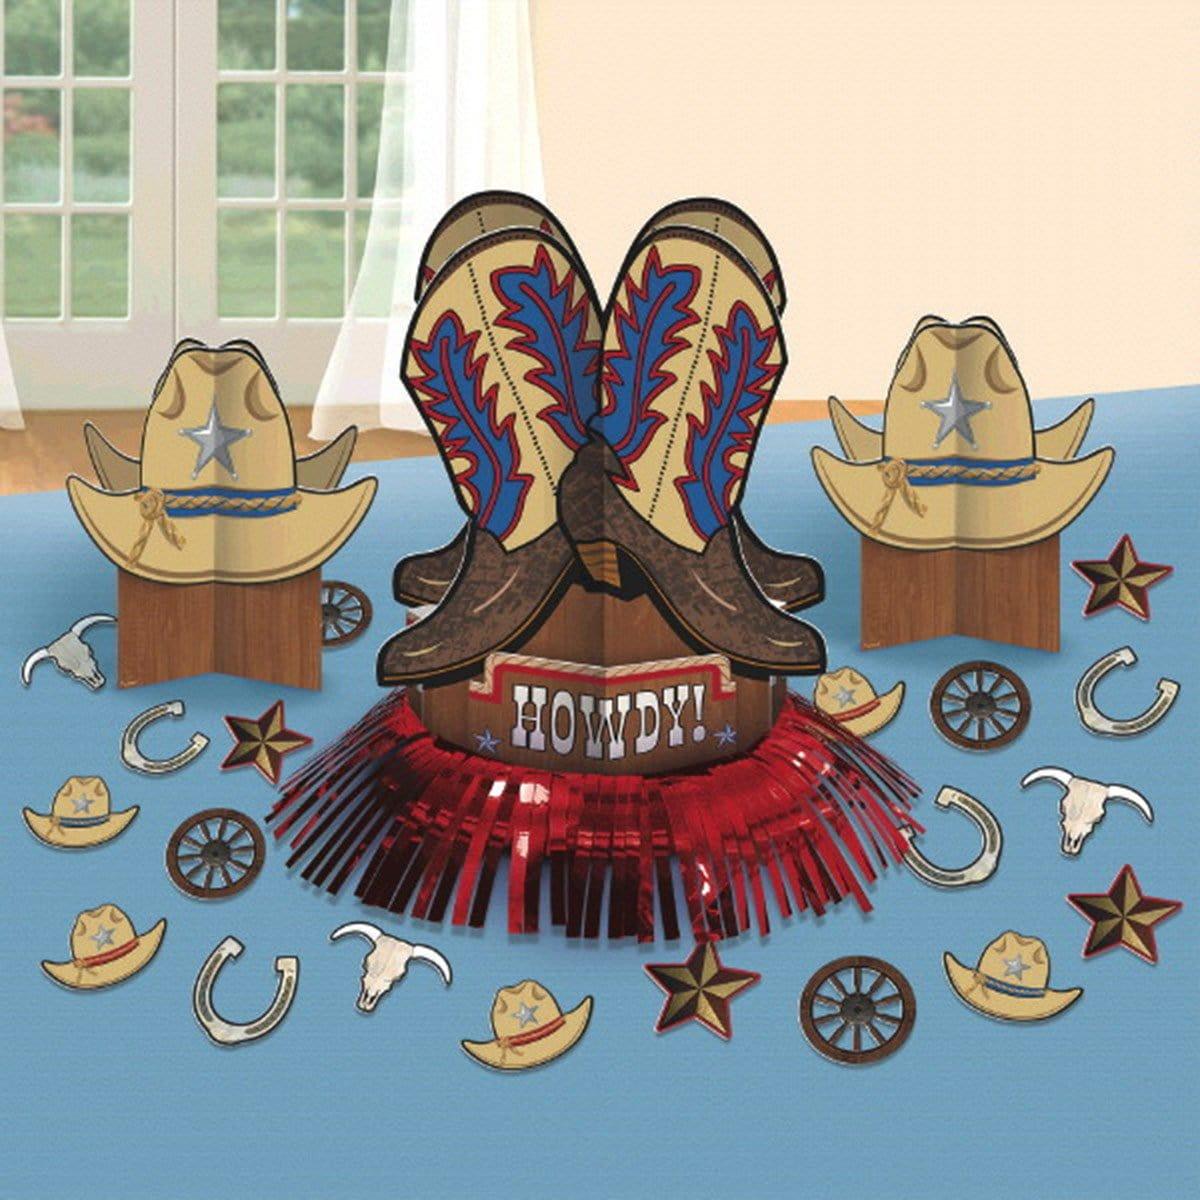 Buy Theme Party Western Table Decorating Kit sold at Party Expert